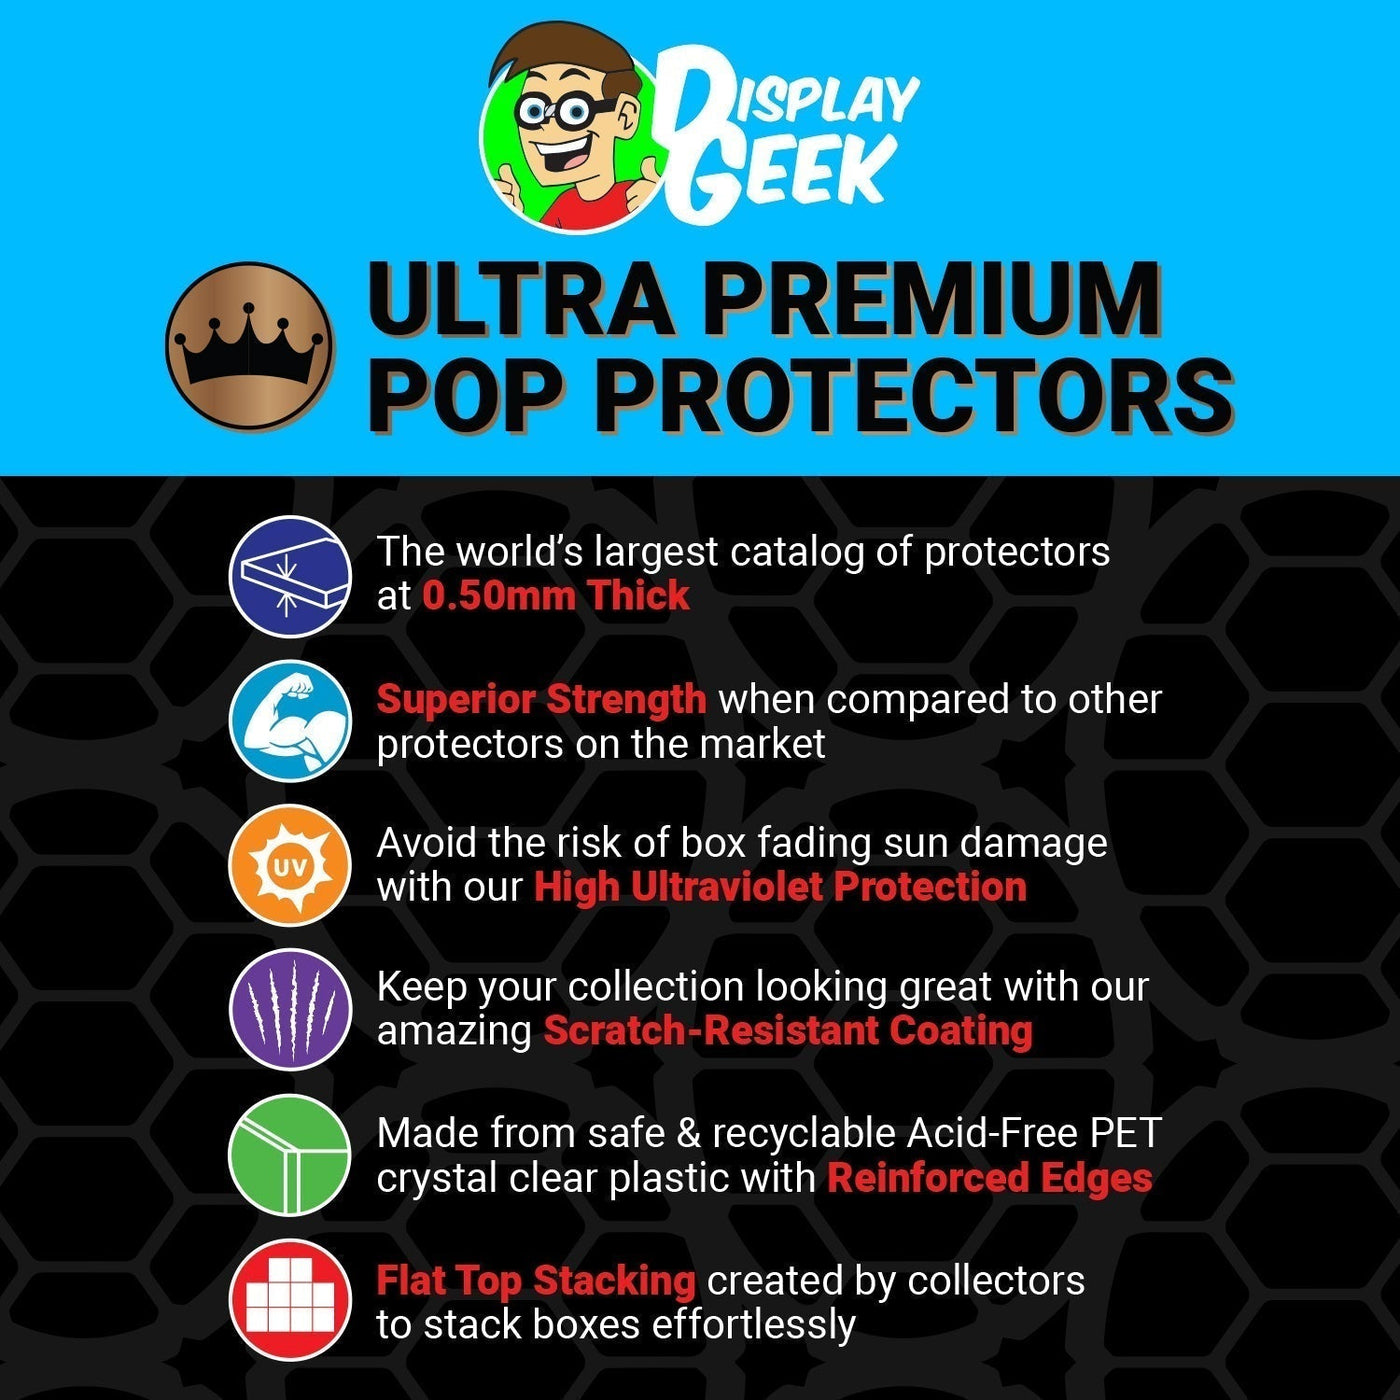 Pop Protector for Villain's Hideout Tomura Shigaraki #1248 Funko Pop Deluxe on The Protector Guide App by Display Geek